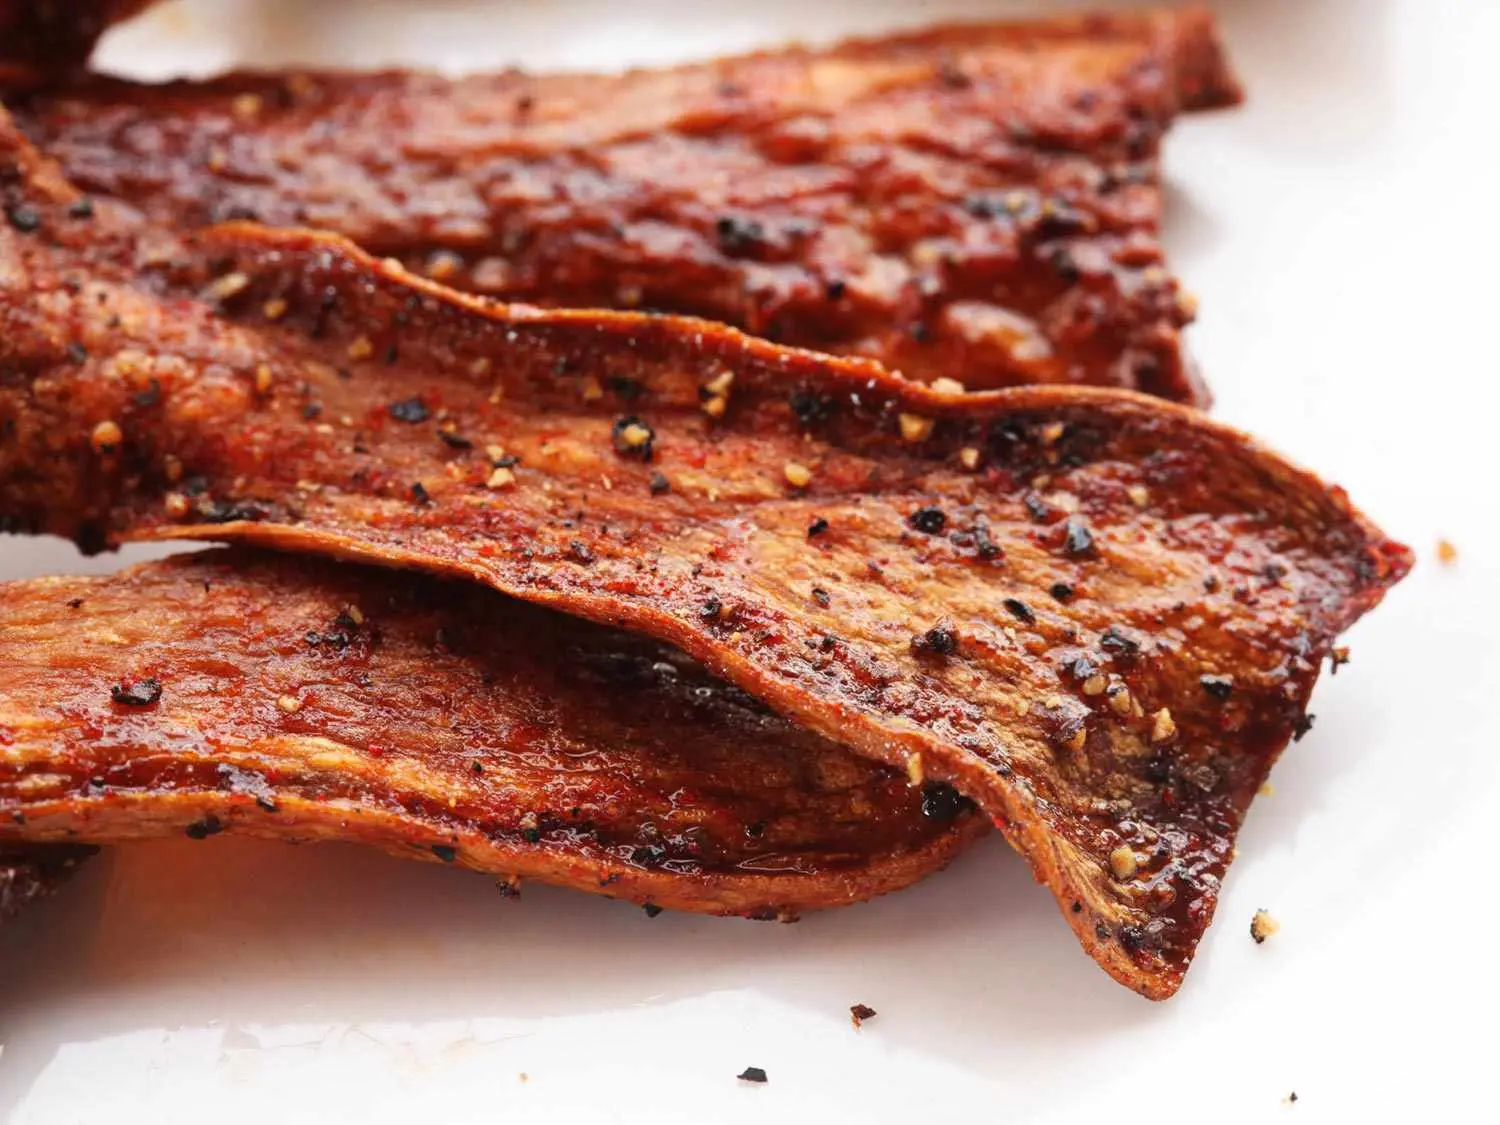 vegetarian smoked bacon - Is there a non meat bacon